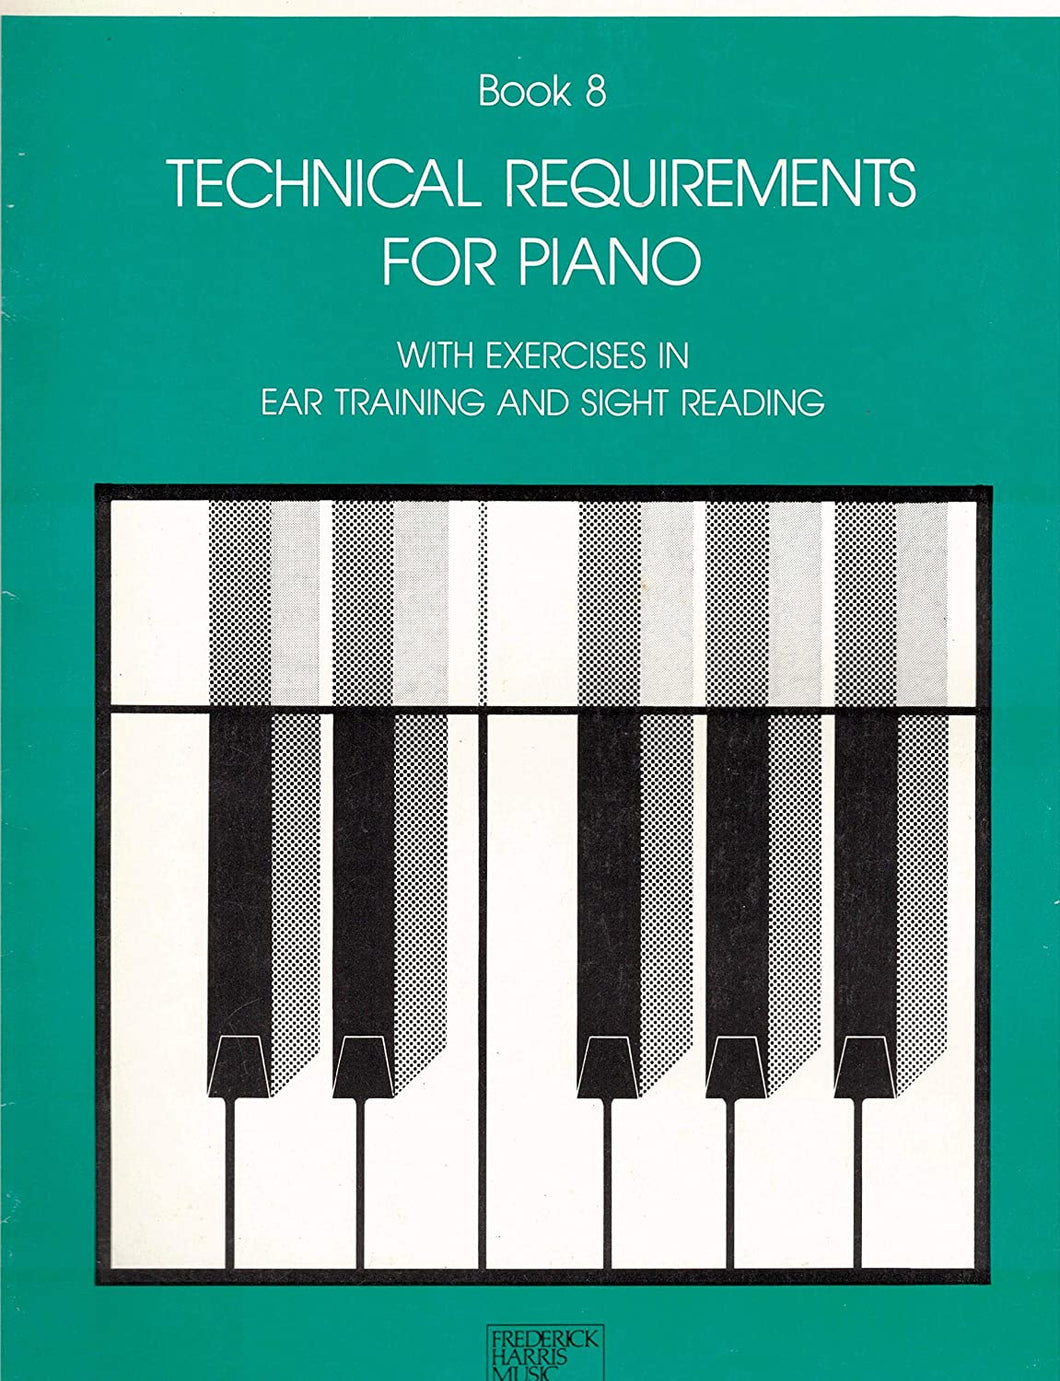 RCM Technical Requirements For Piano Grade 8 with Ear Training and Sight Reading Exercises (1984)